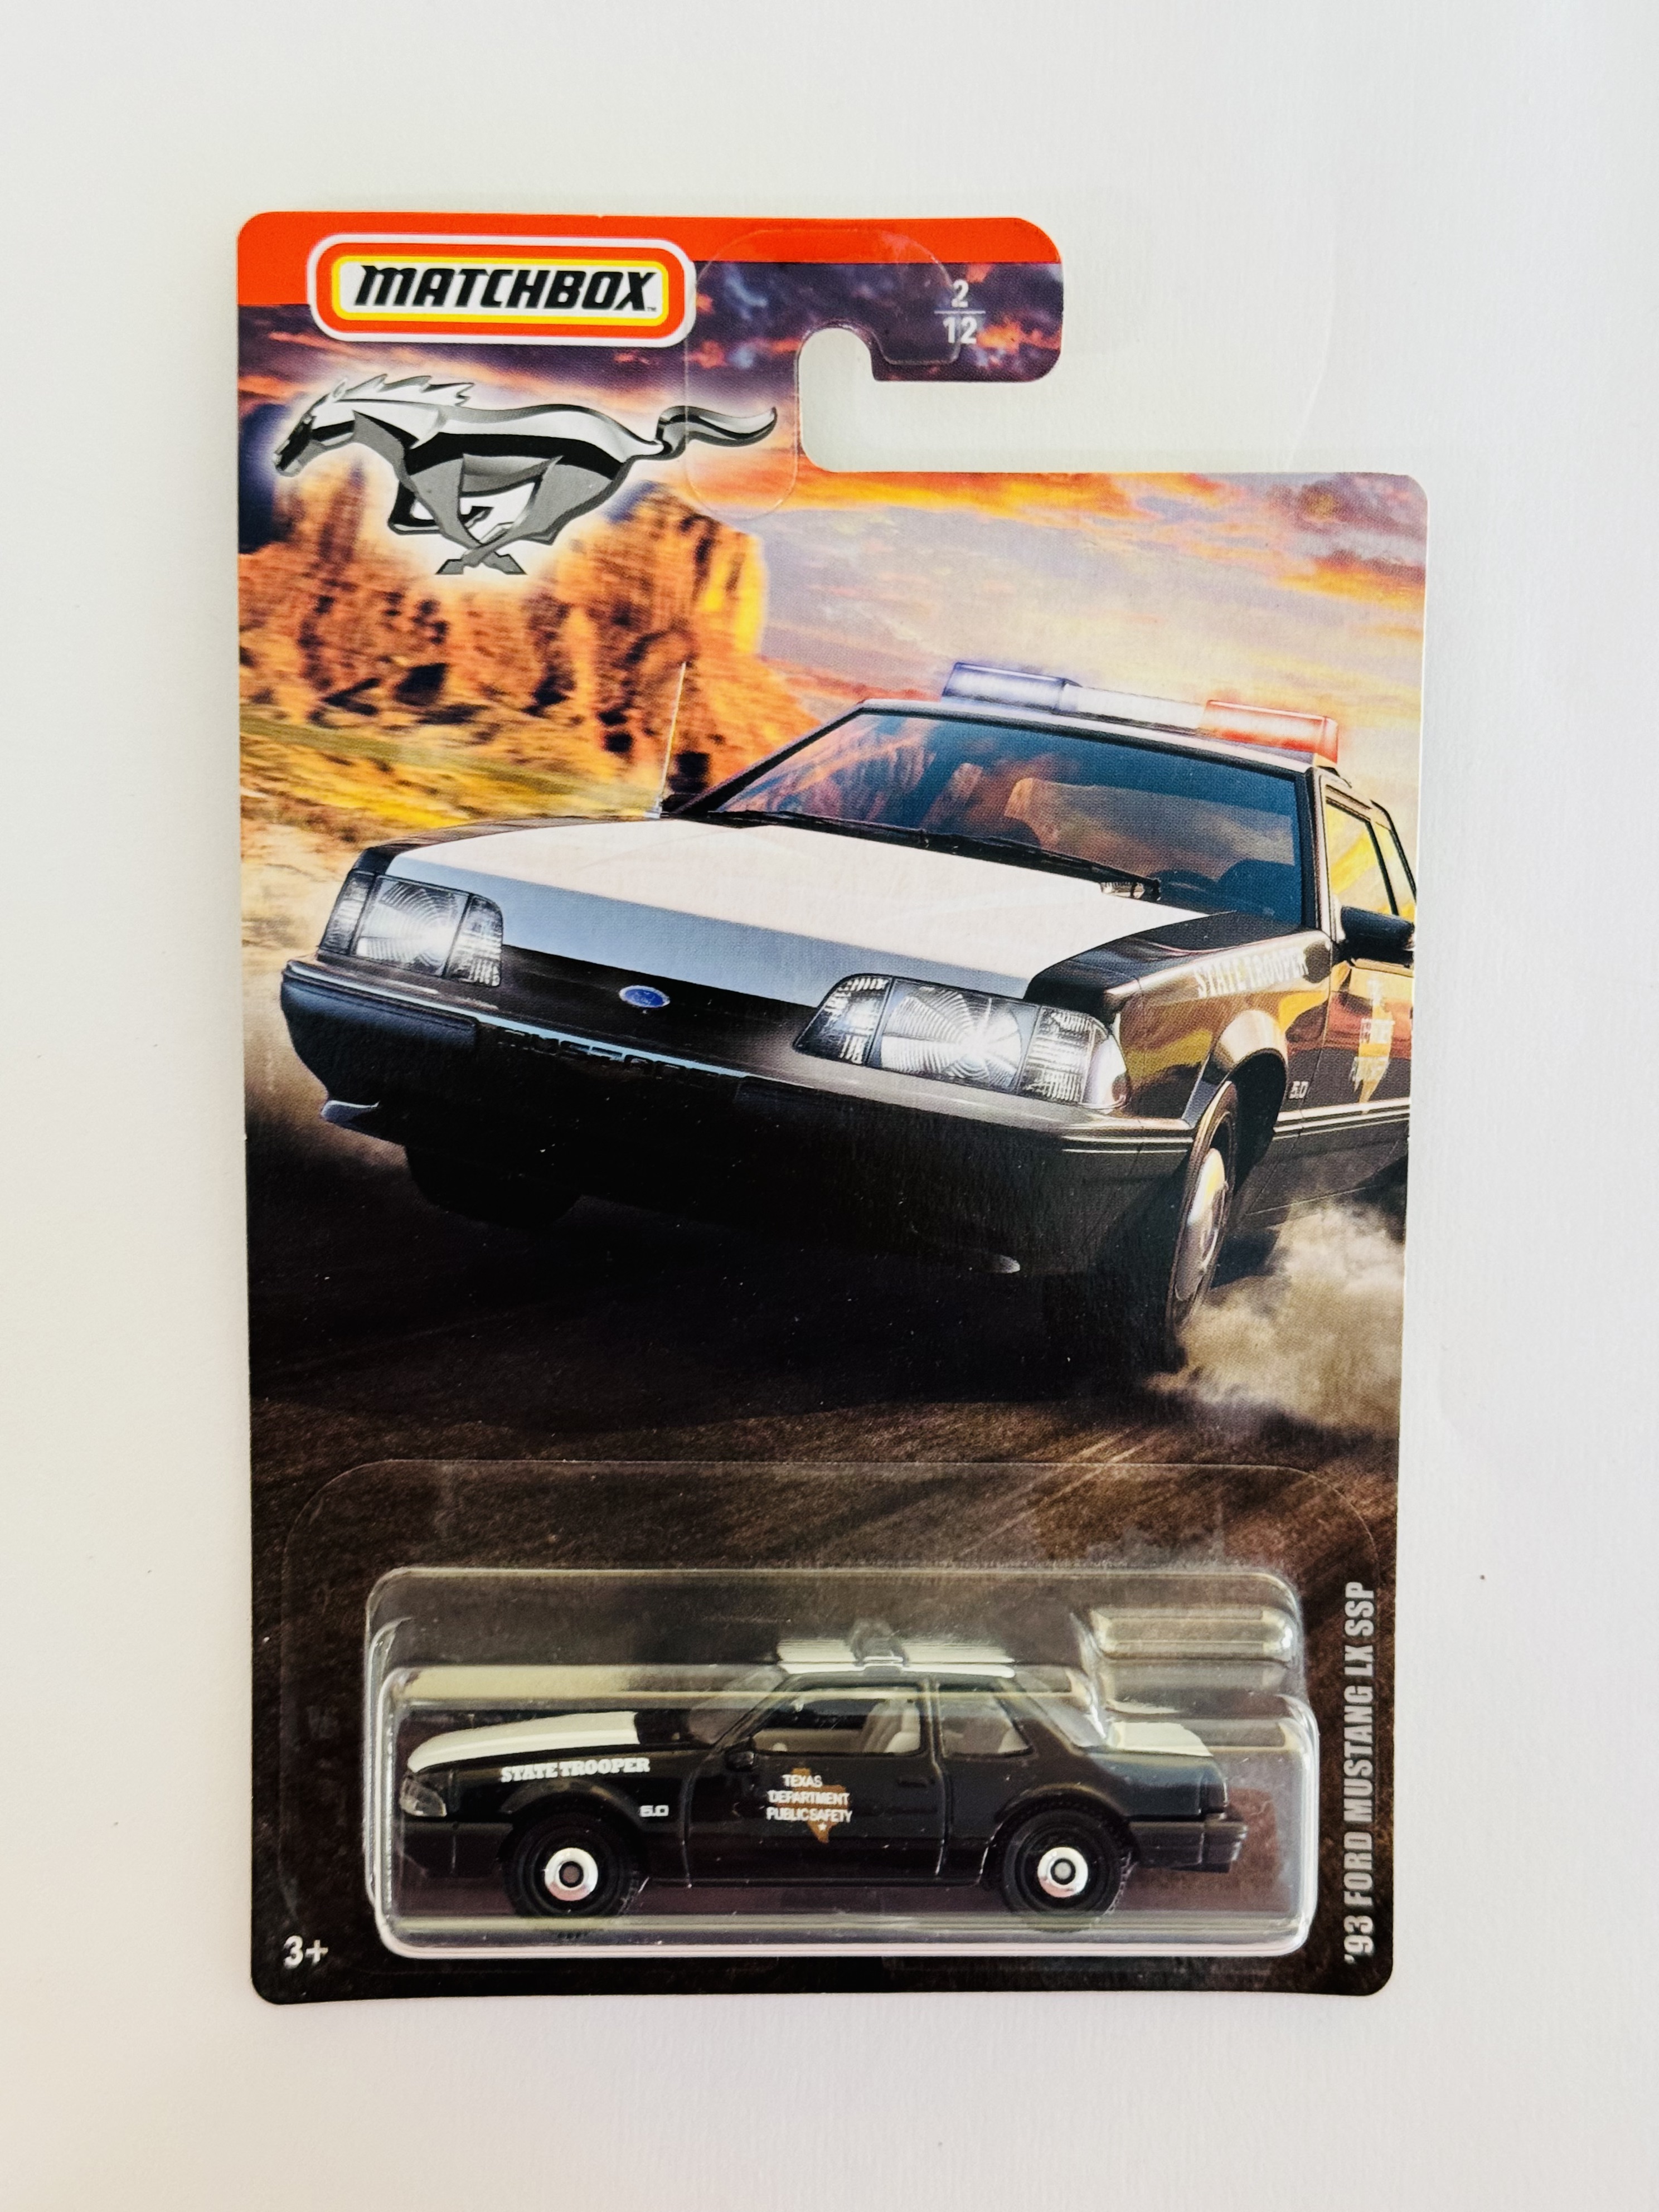 Matchbox Mustang Series '93 Ford Mustang LX SSP